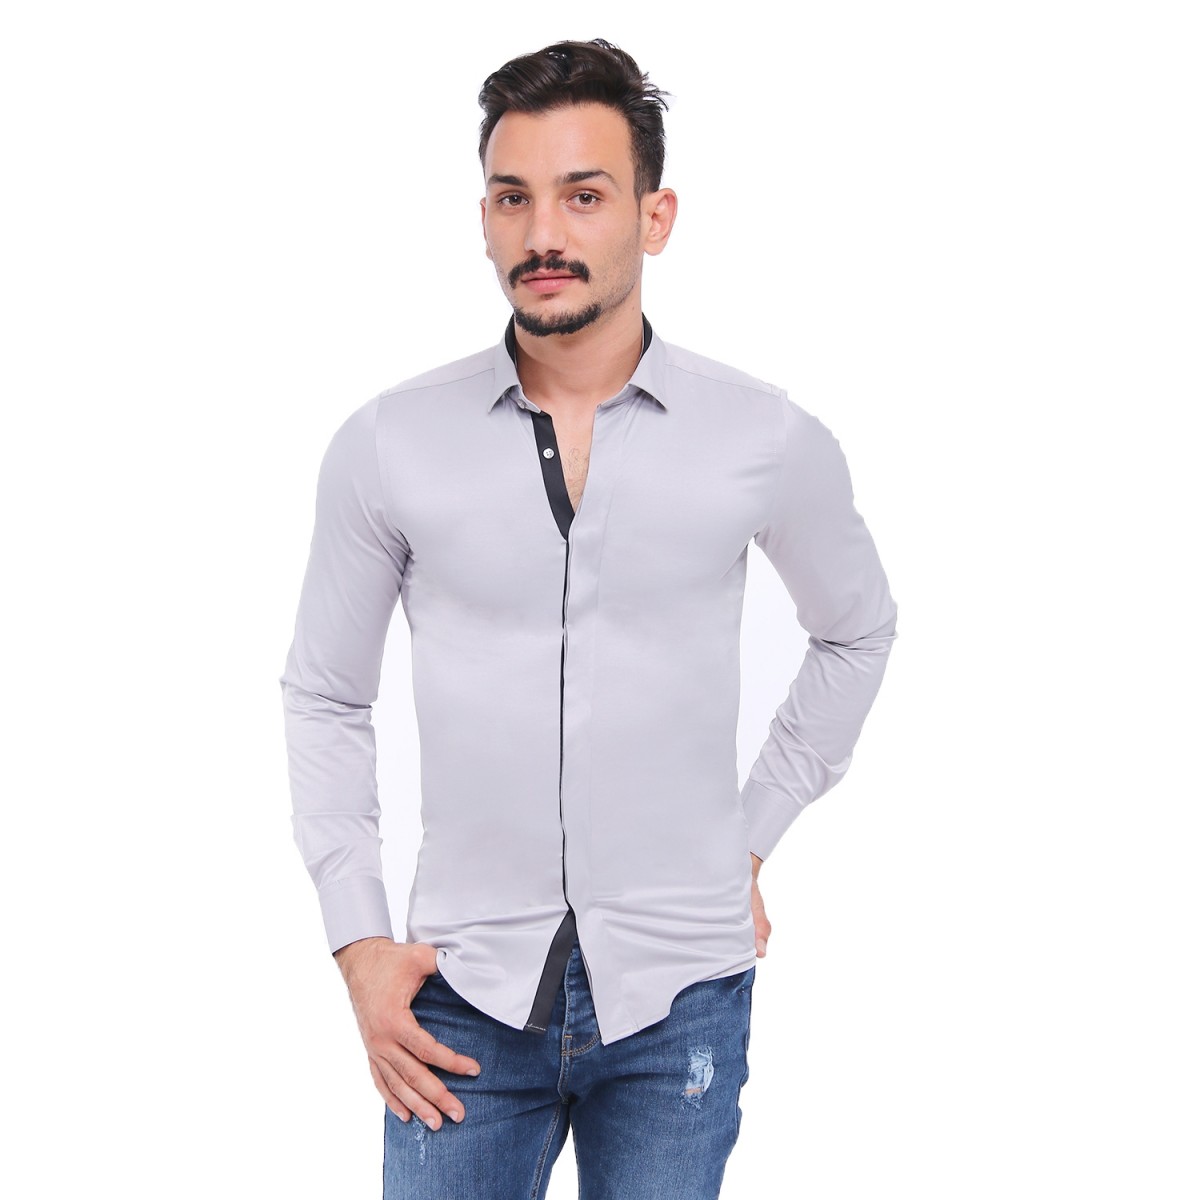 CHEMISE ML HOMME CHEMISE ML HOMME Hamadi Abid nouvelle collection 2020